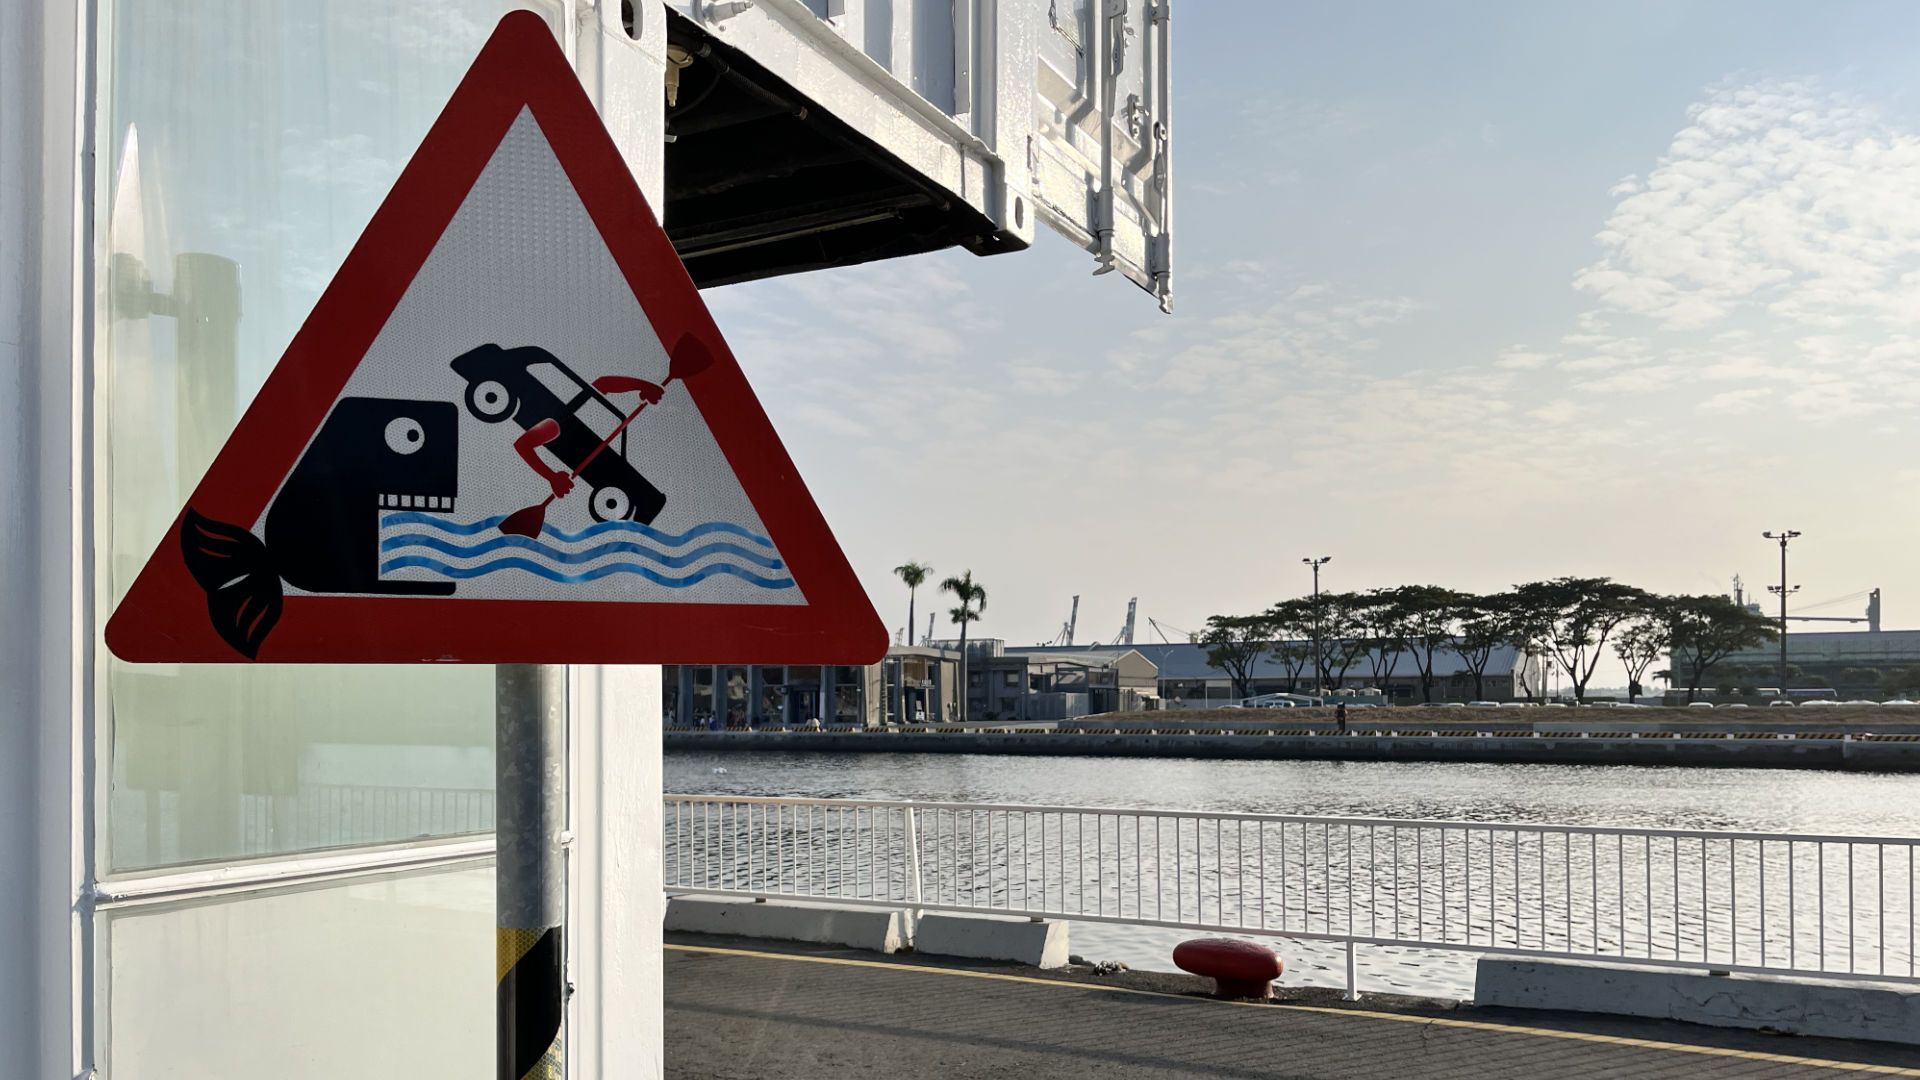 A triangular road sign depicting a large fish biting a car that is being rowed along a body of water.